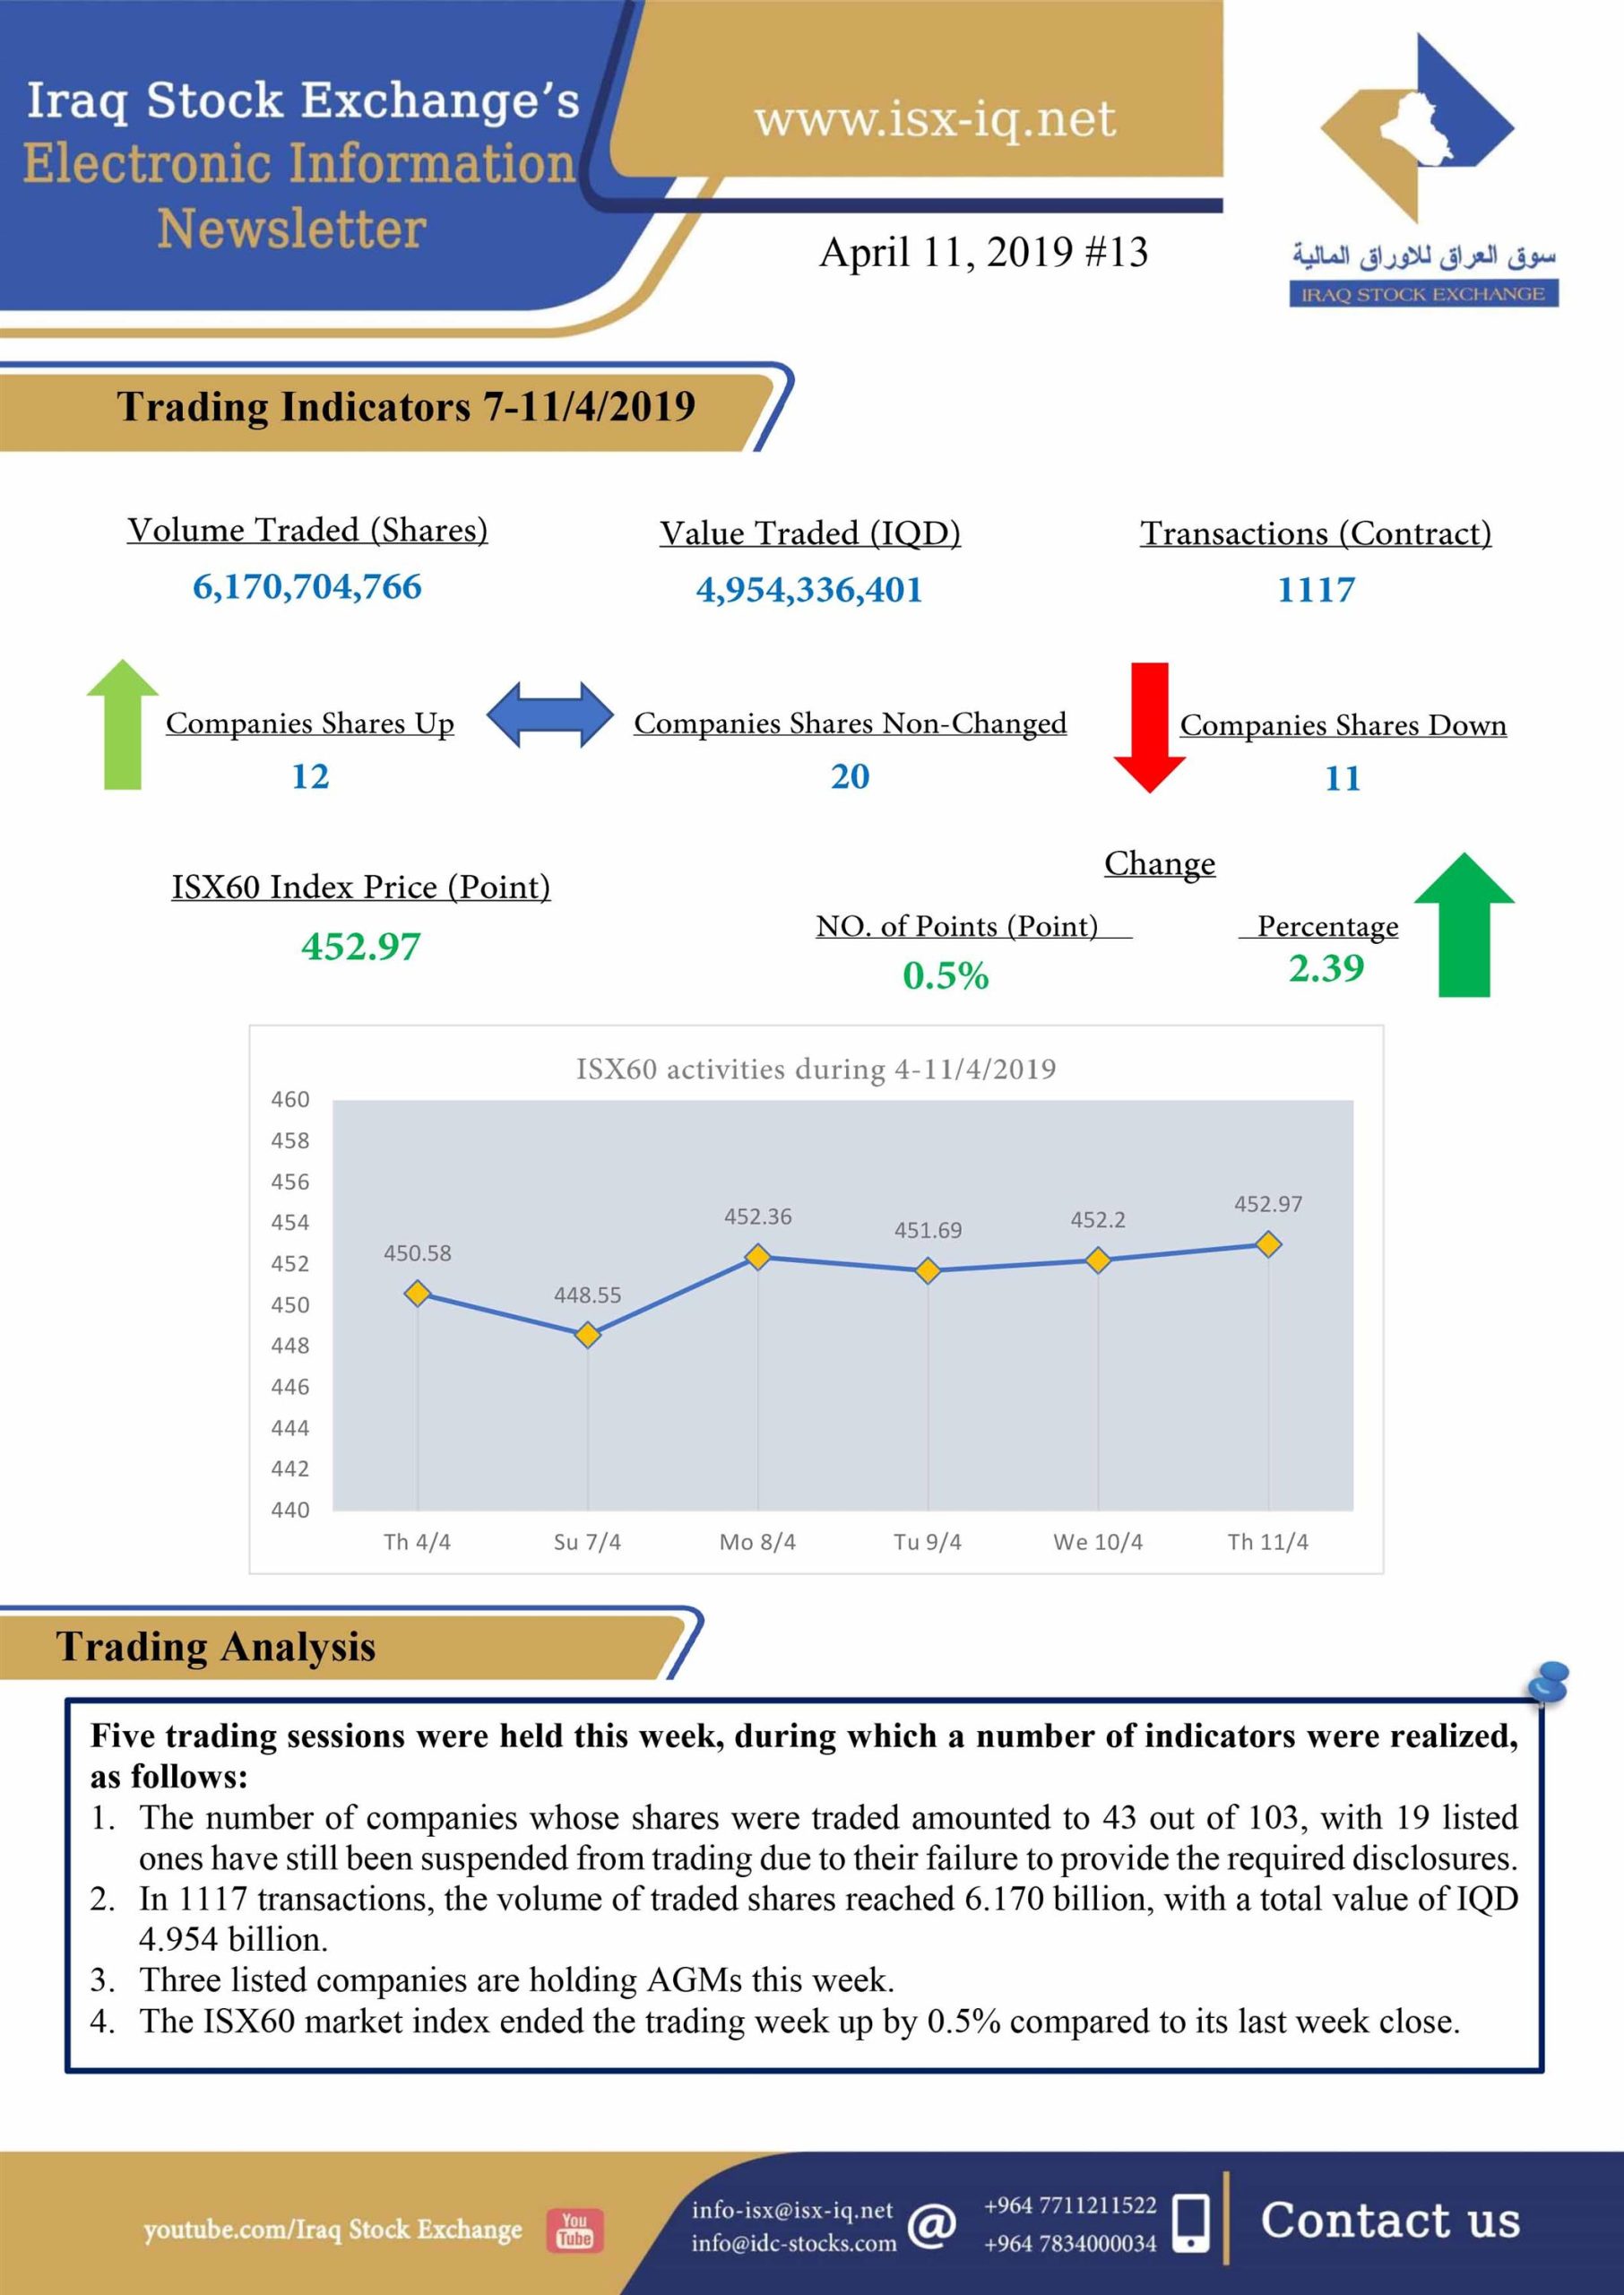 You are currently viewing Issue number 13 of (Iraq Stock Exchange’s Electronic Information weekly Newsletter)